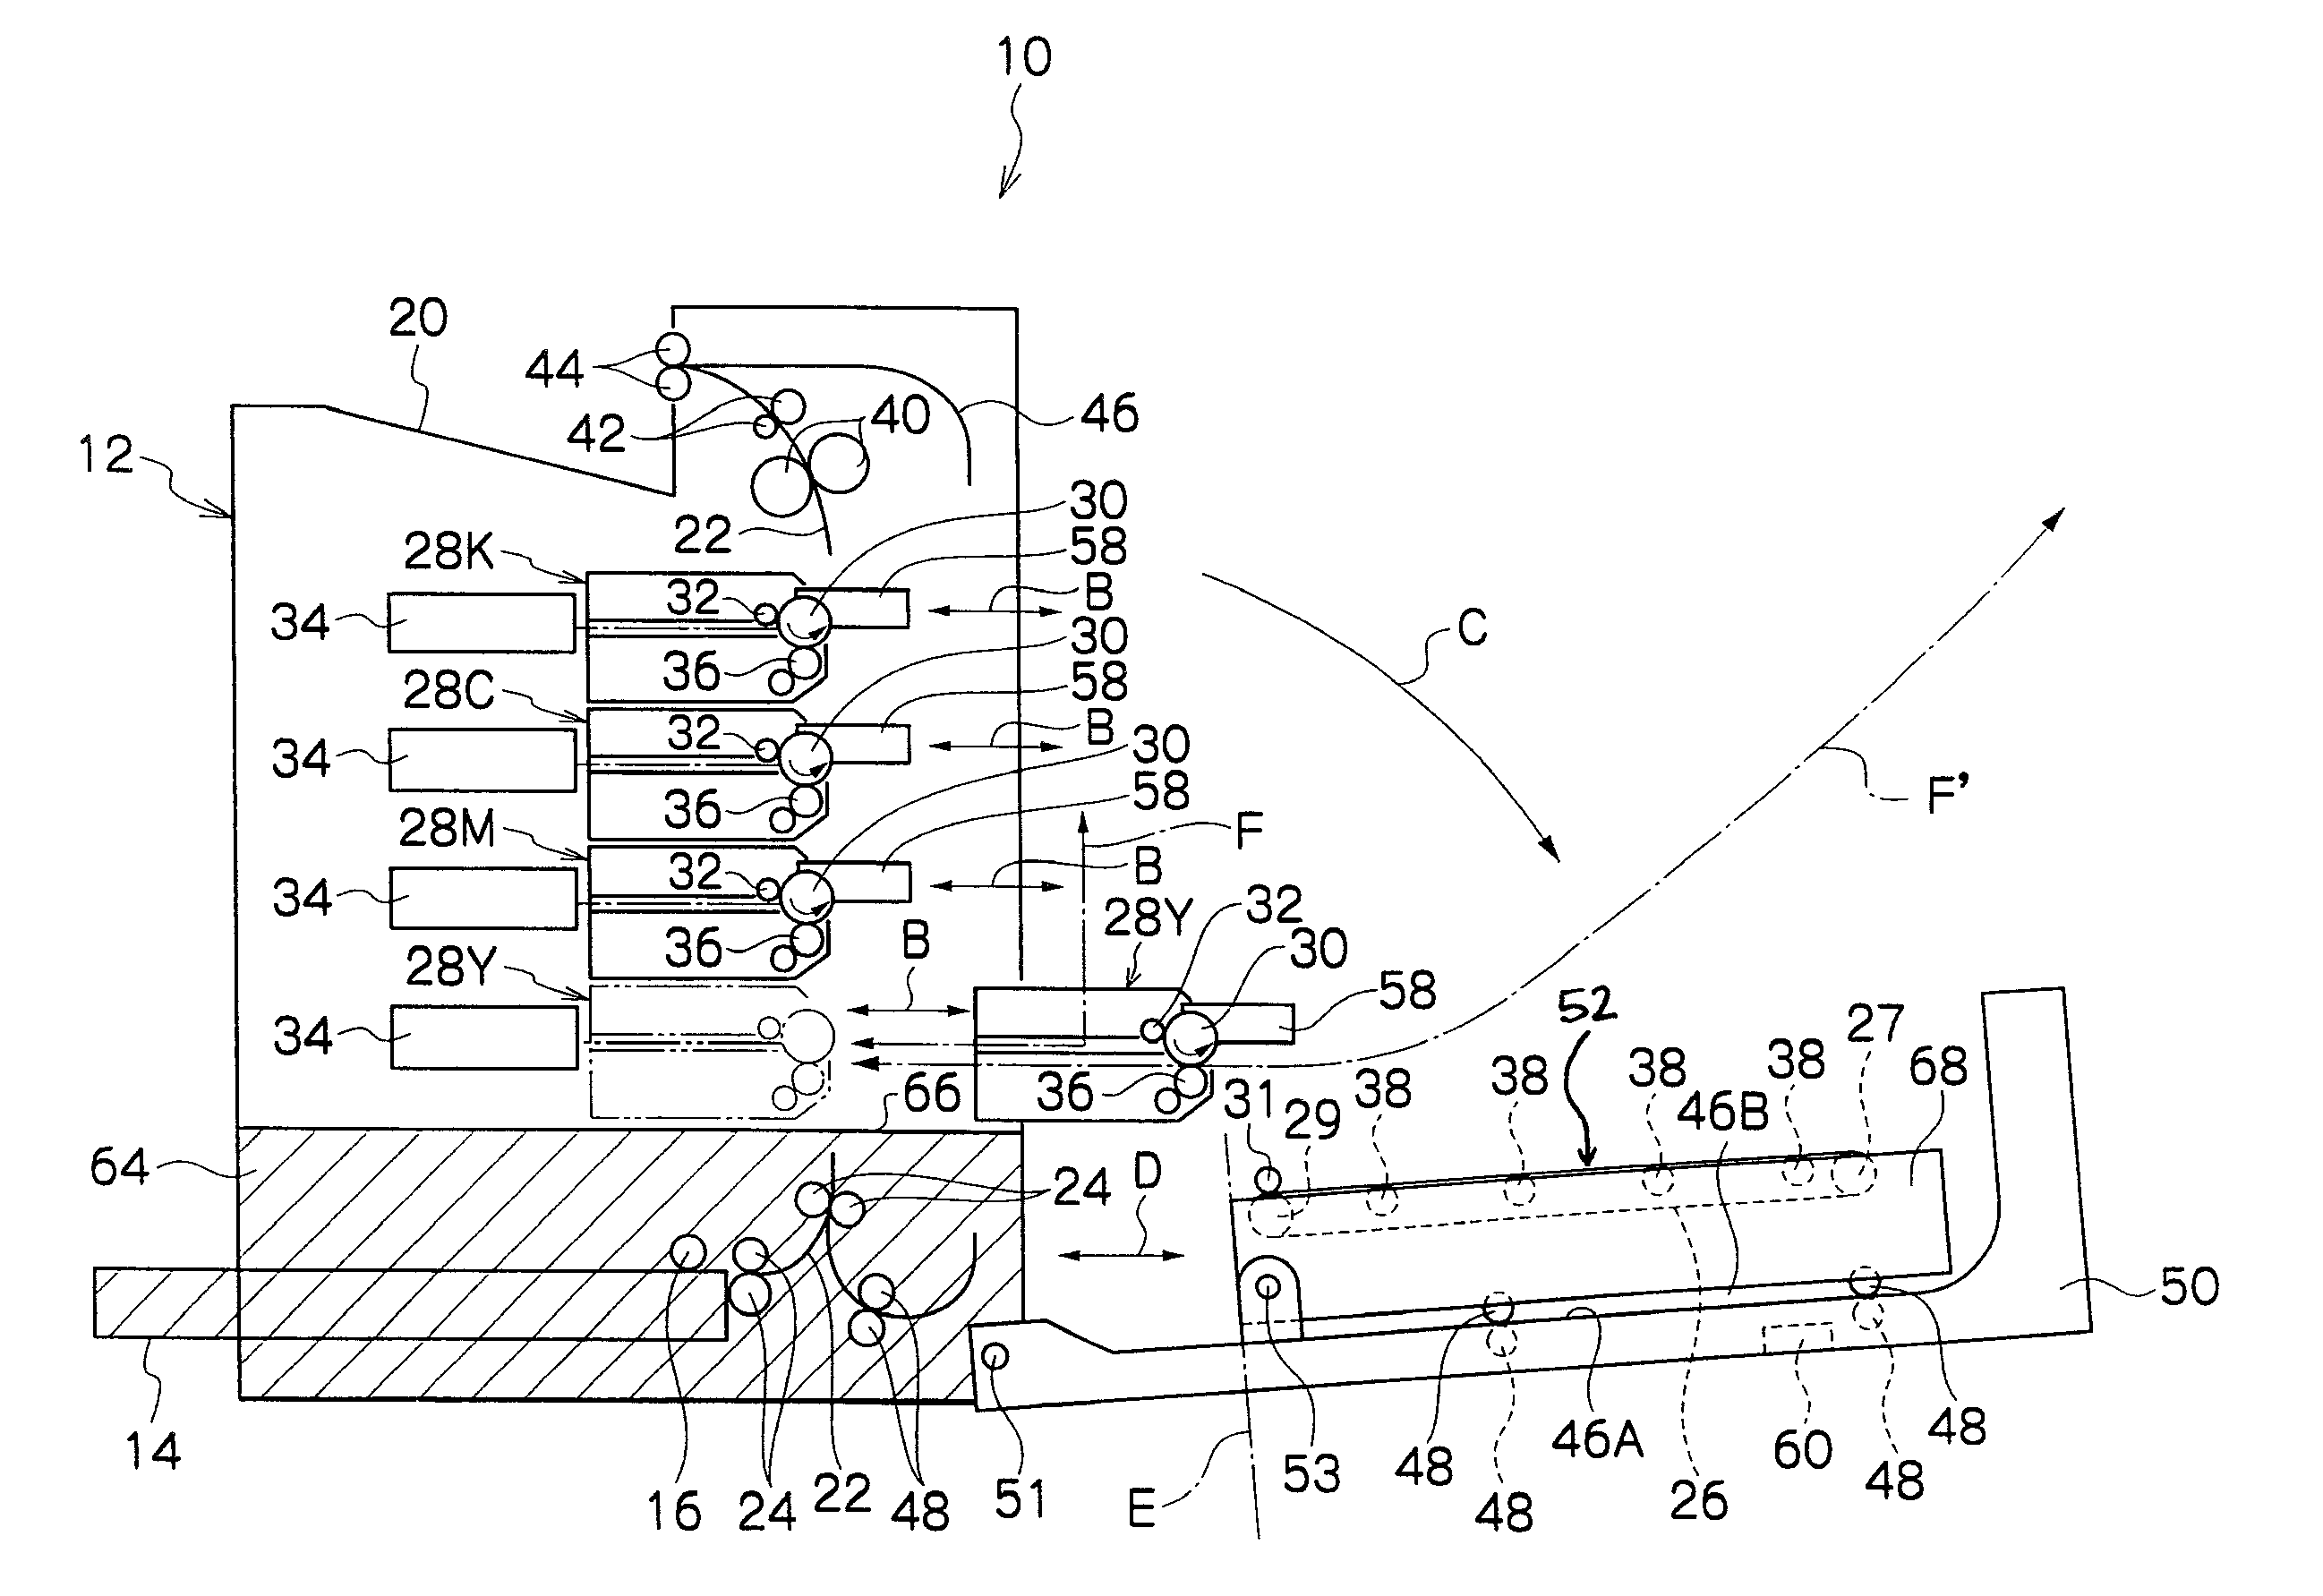 Image formation device with belt mounted pivoting cover